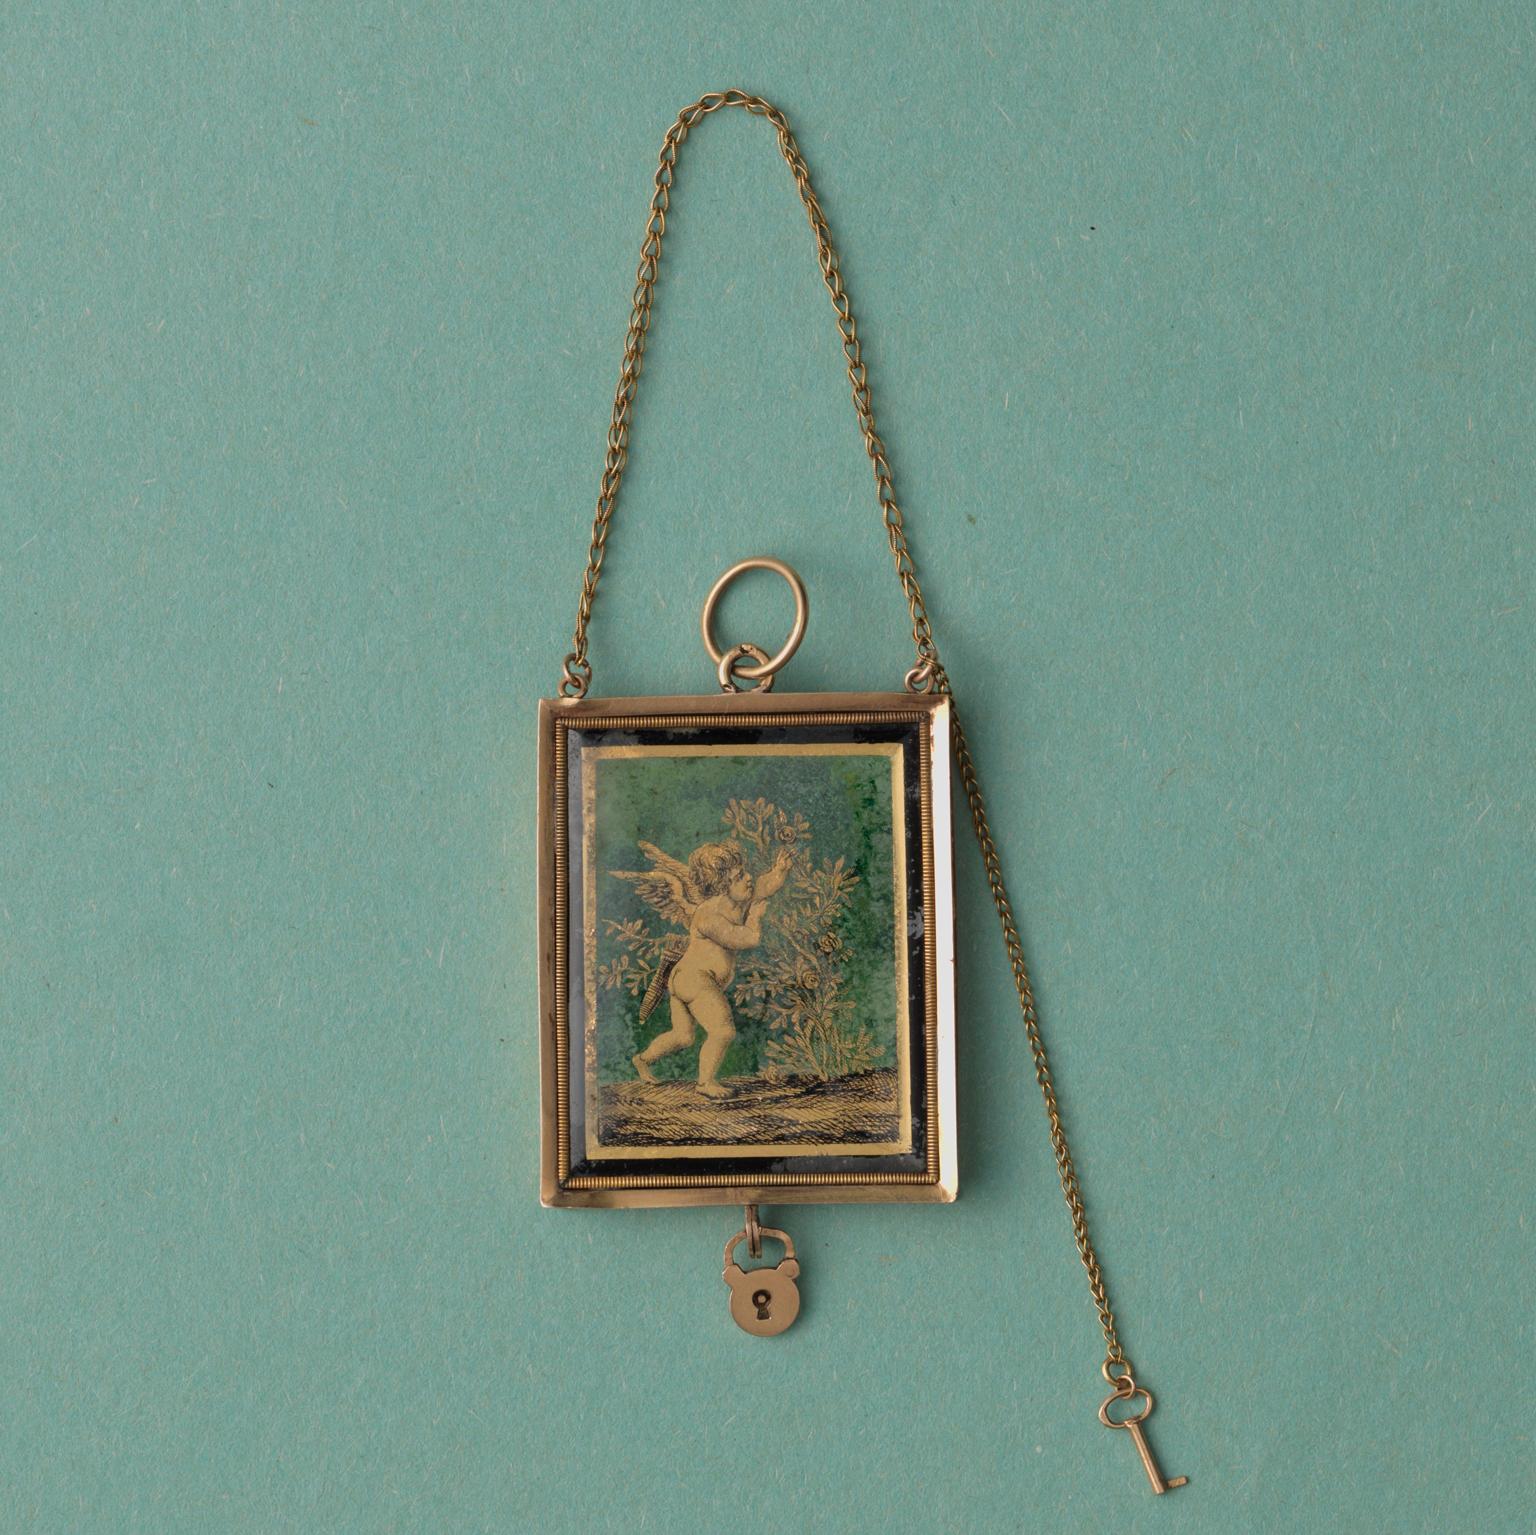 An 18 carat gold and black and gold ‘verre eglomisé’ angel locket, the little lock opens to open the locket, marked with a French gold mark for 1809-1819, wonderful condition and with all original elements. The angel is picking roses which symbolise